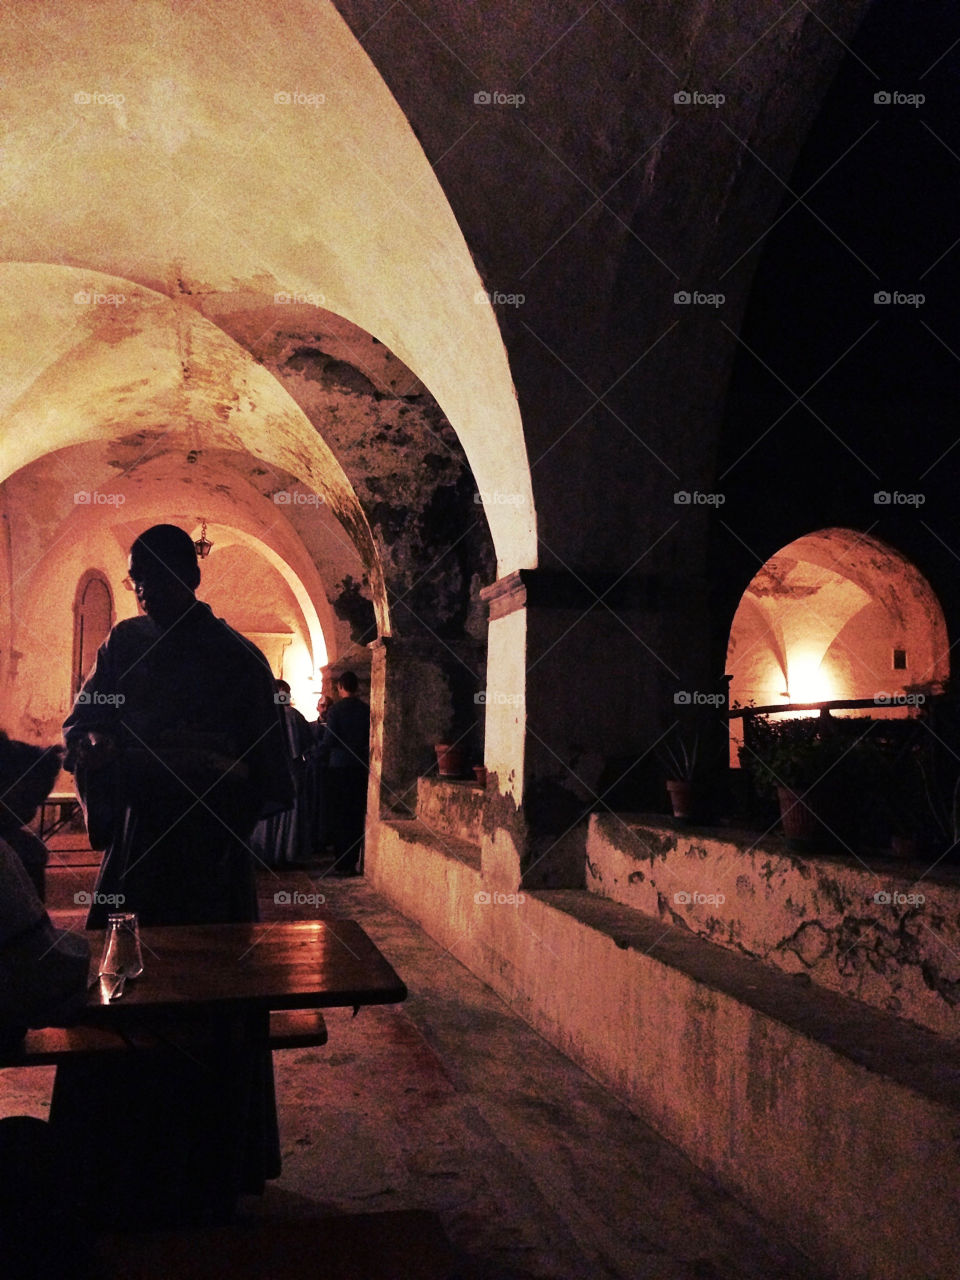 Friar in an old monastery in Italy